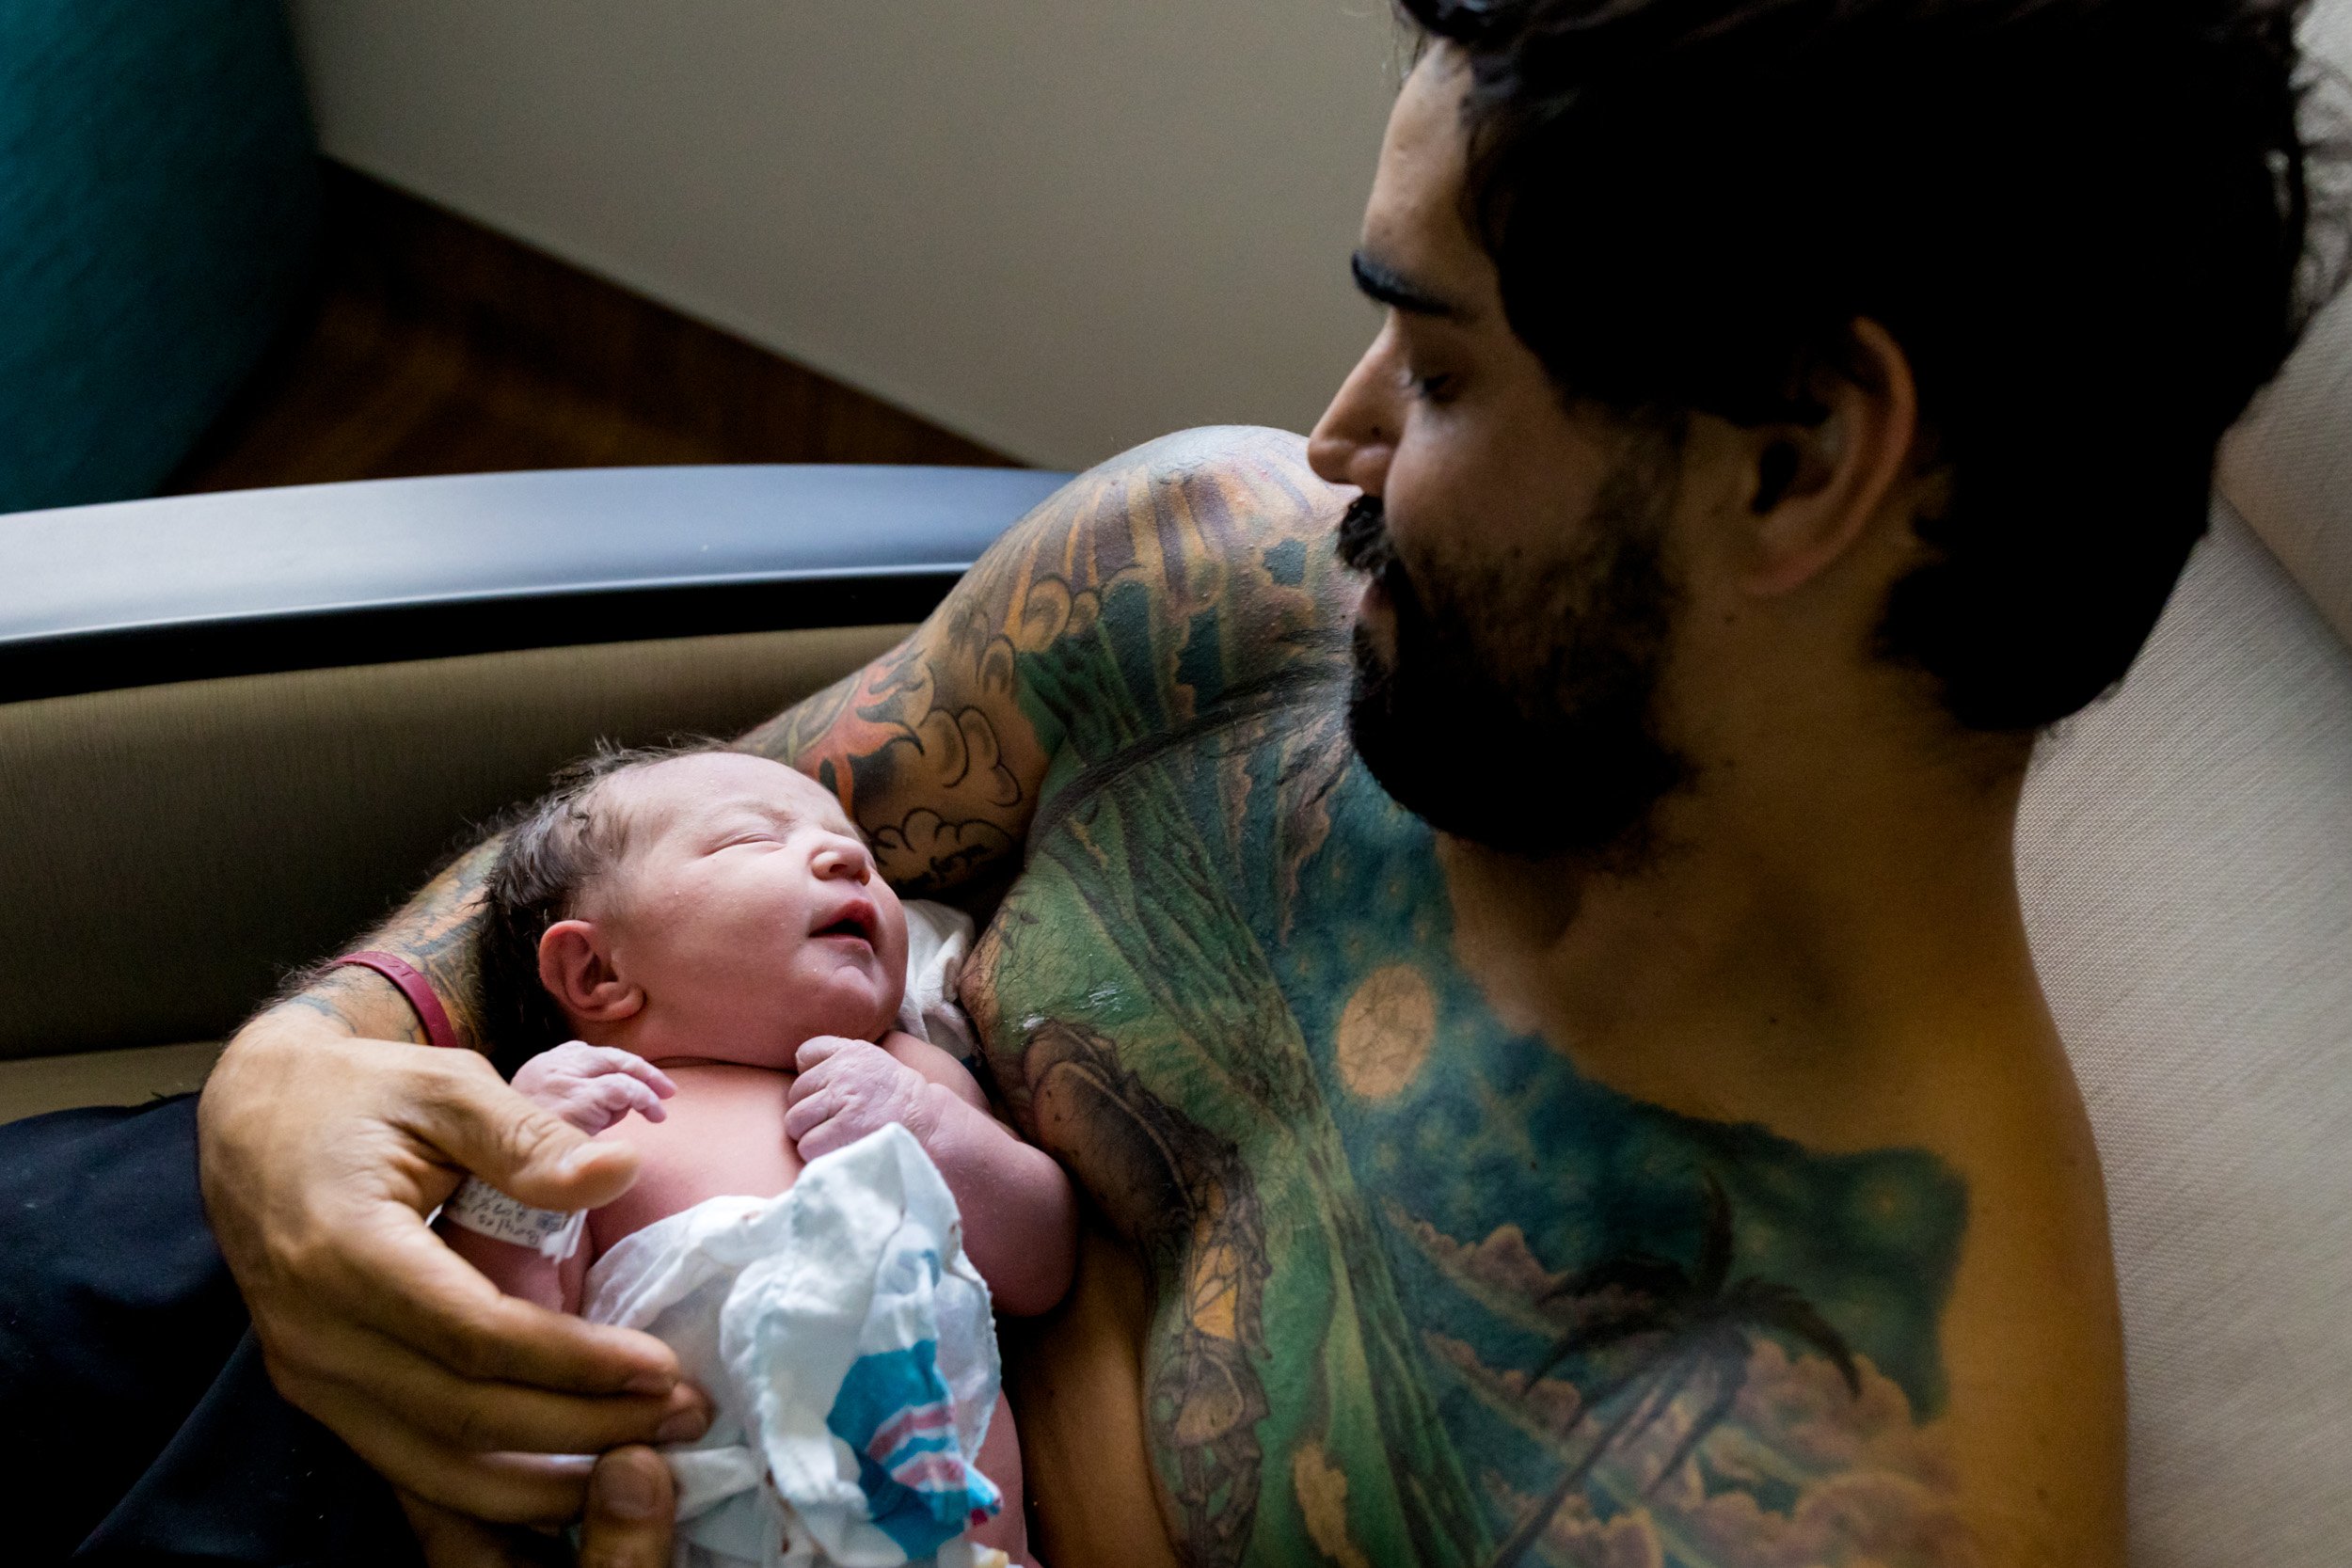 jacksonville dad holding his baby for skin-to-skin time